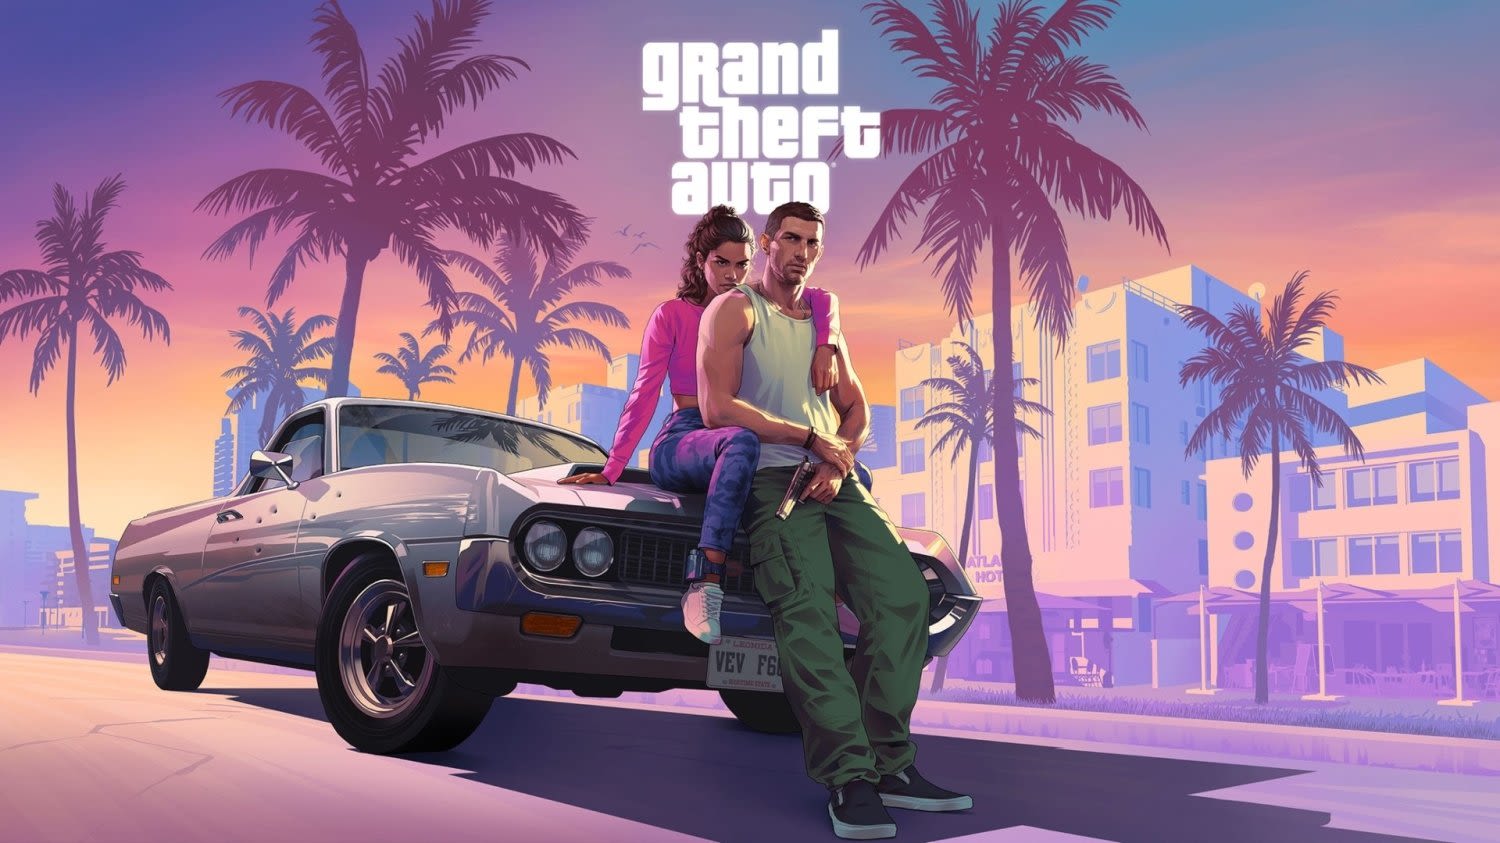 Take-Two boss is 'highly confident' Grand Theft Auto 6 will hit its 2025 release window